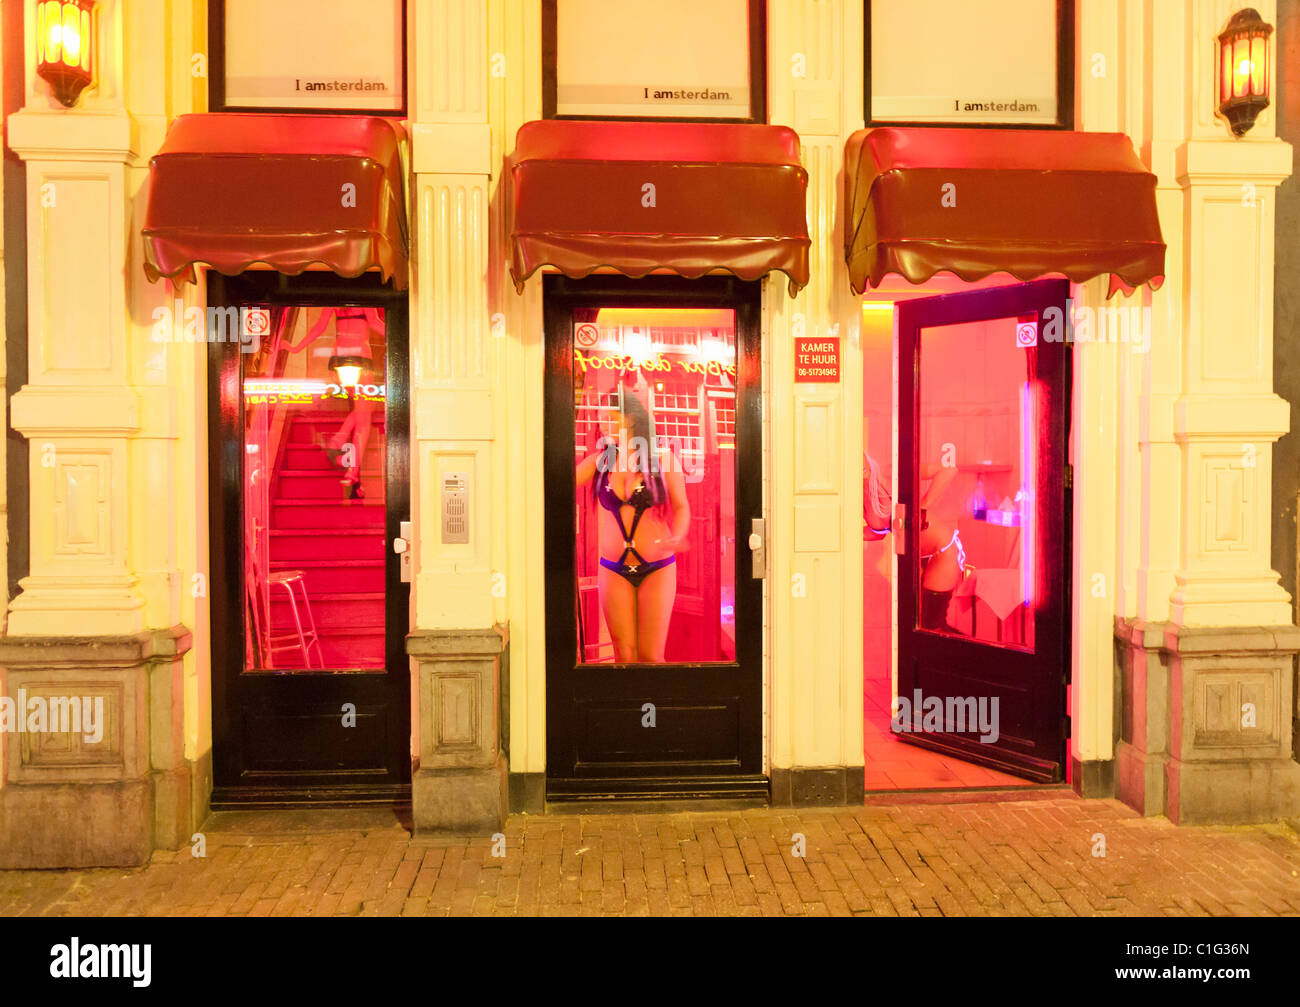 Prostitutes in windows in Red Light District in Amsterdam The Netherlands  Stock Photo - Alamy